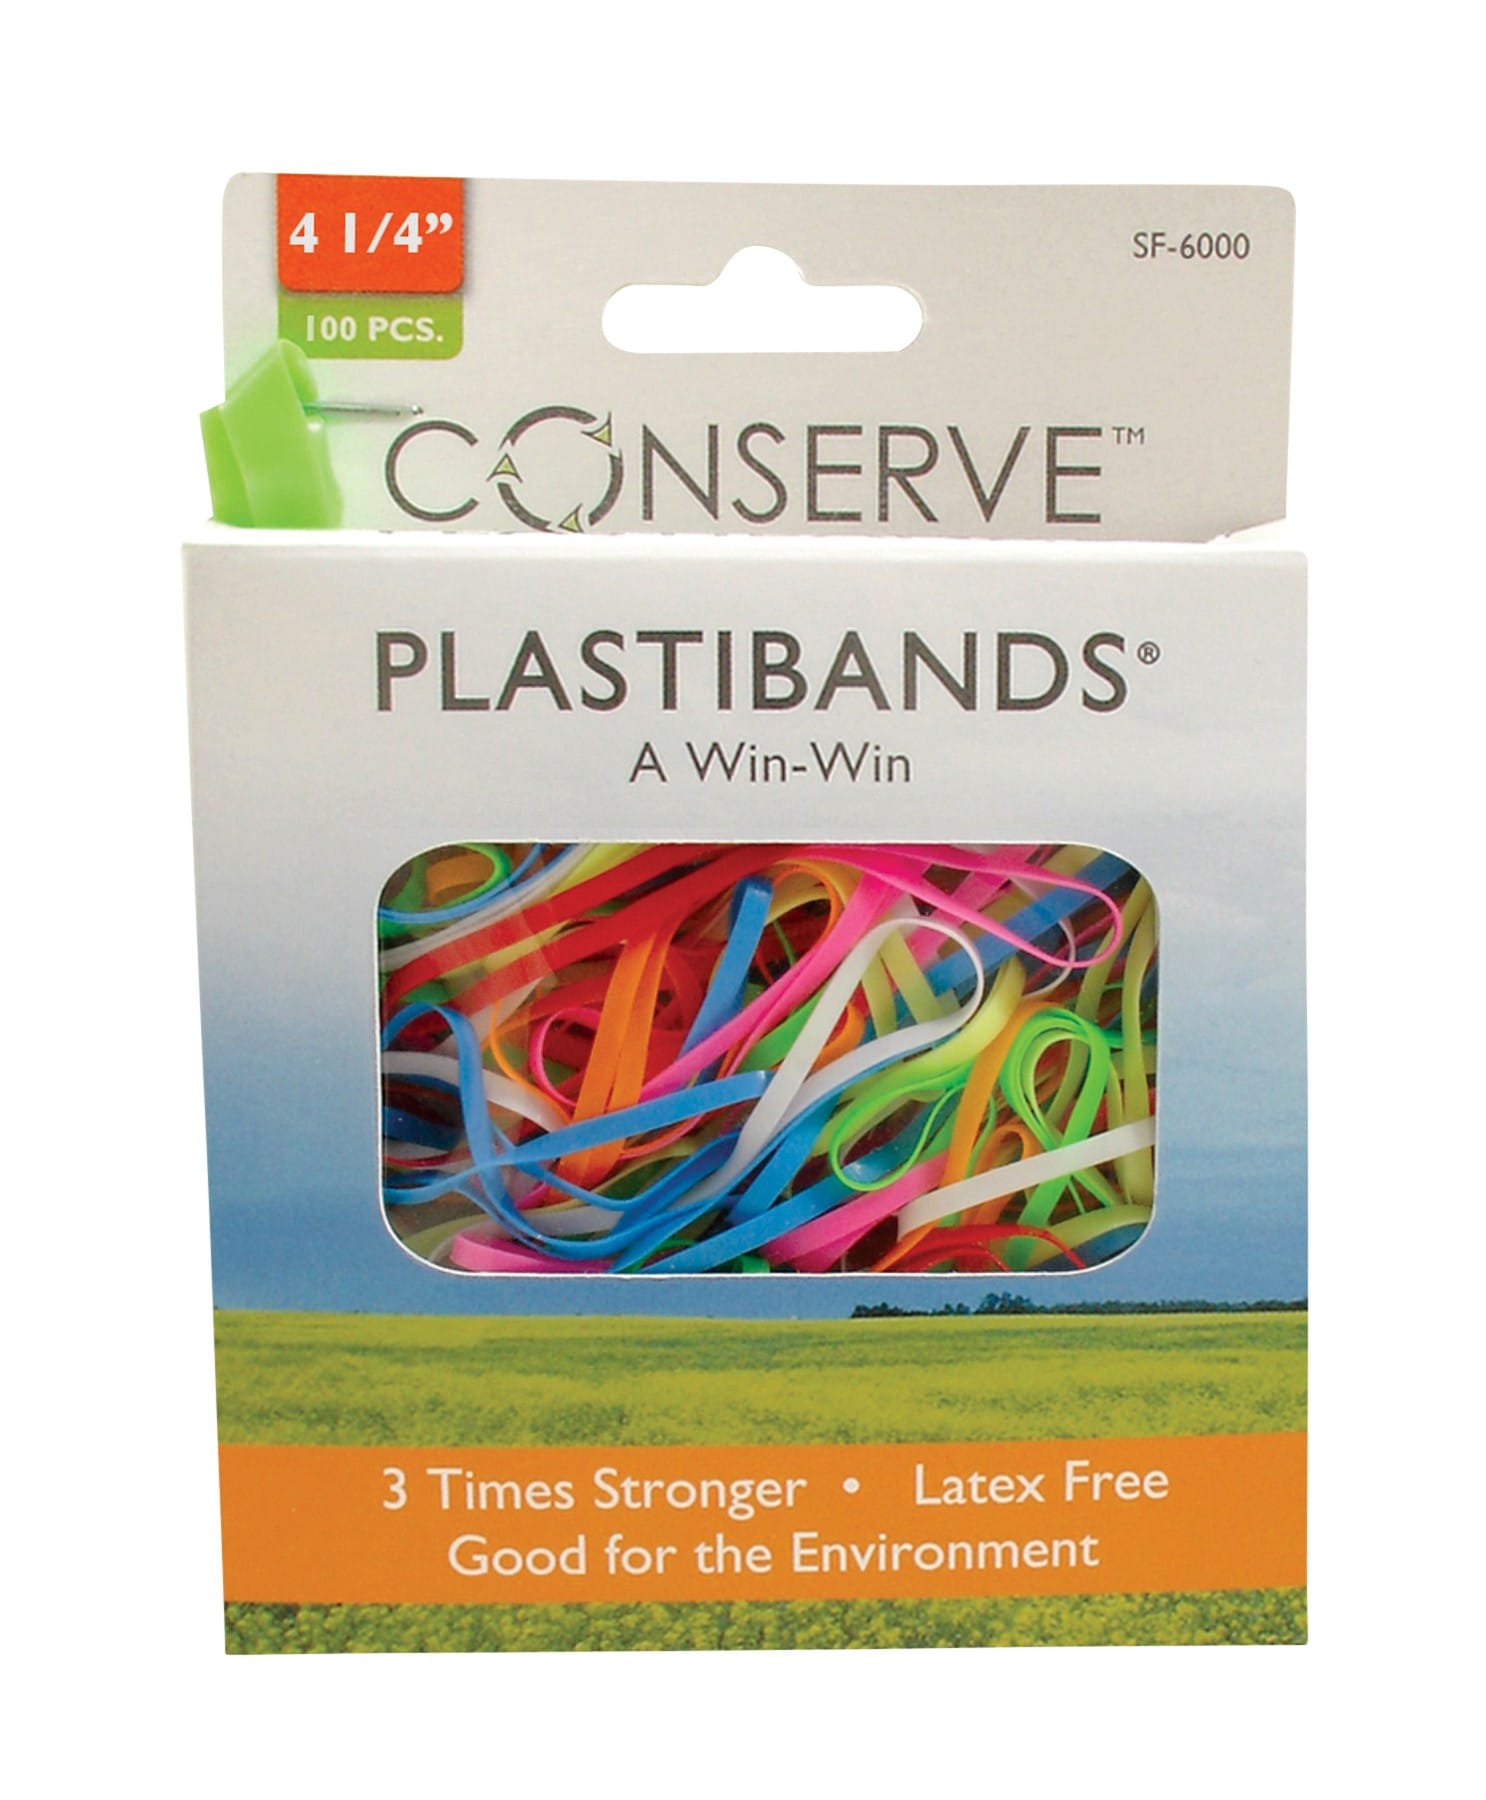 CONSERVE PlastiBands 4 1/4" 100 Pack ASSORTED Colors (SF-6000)